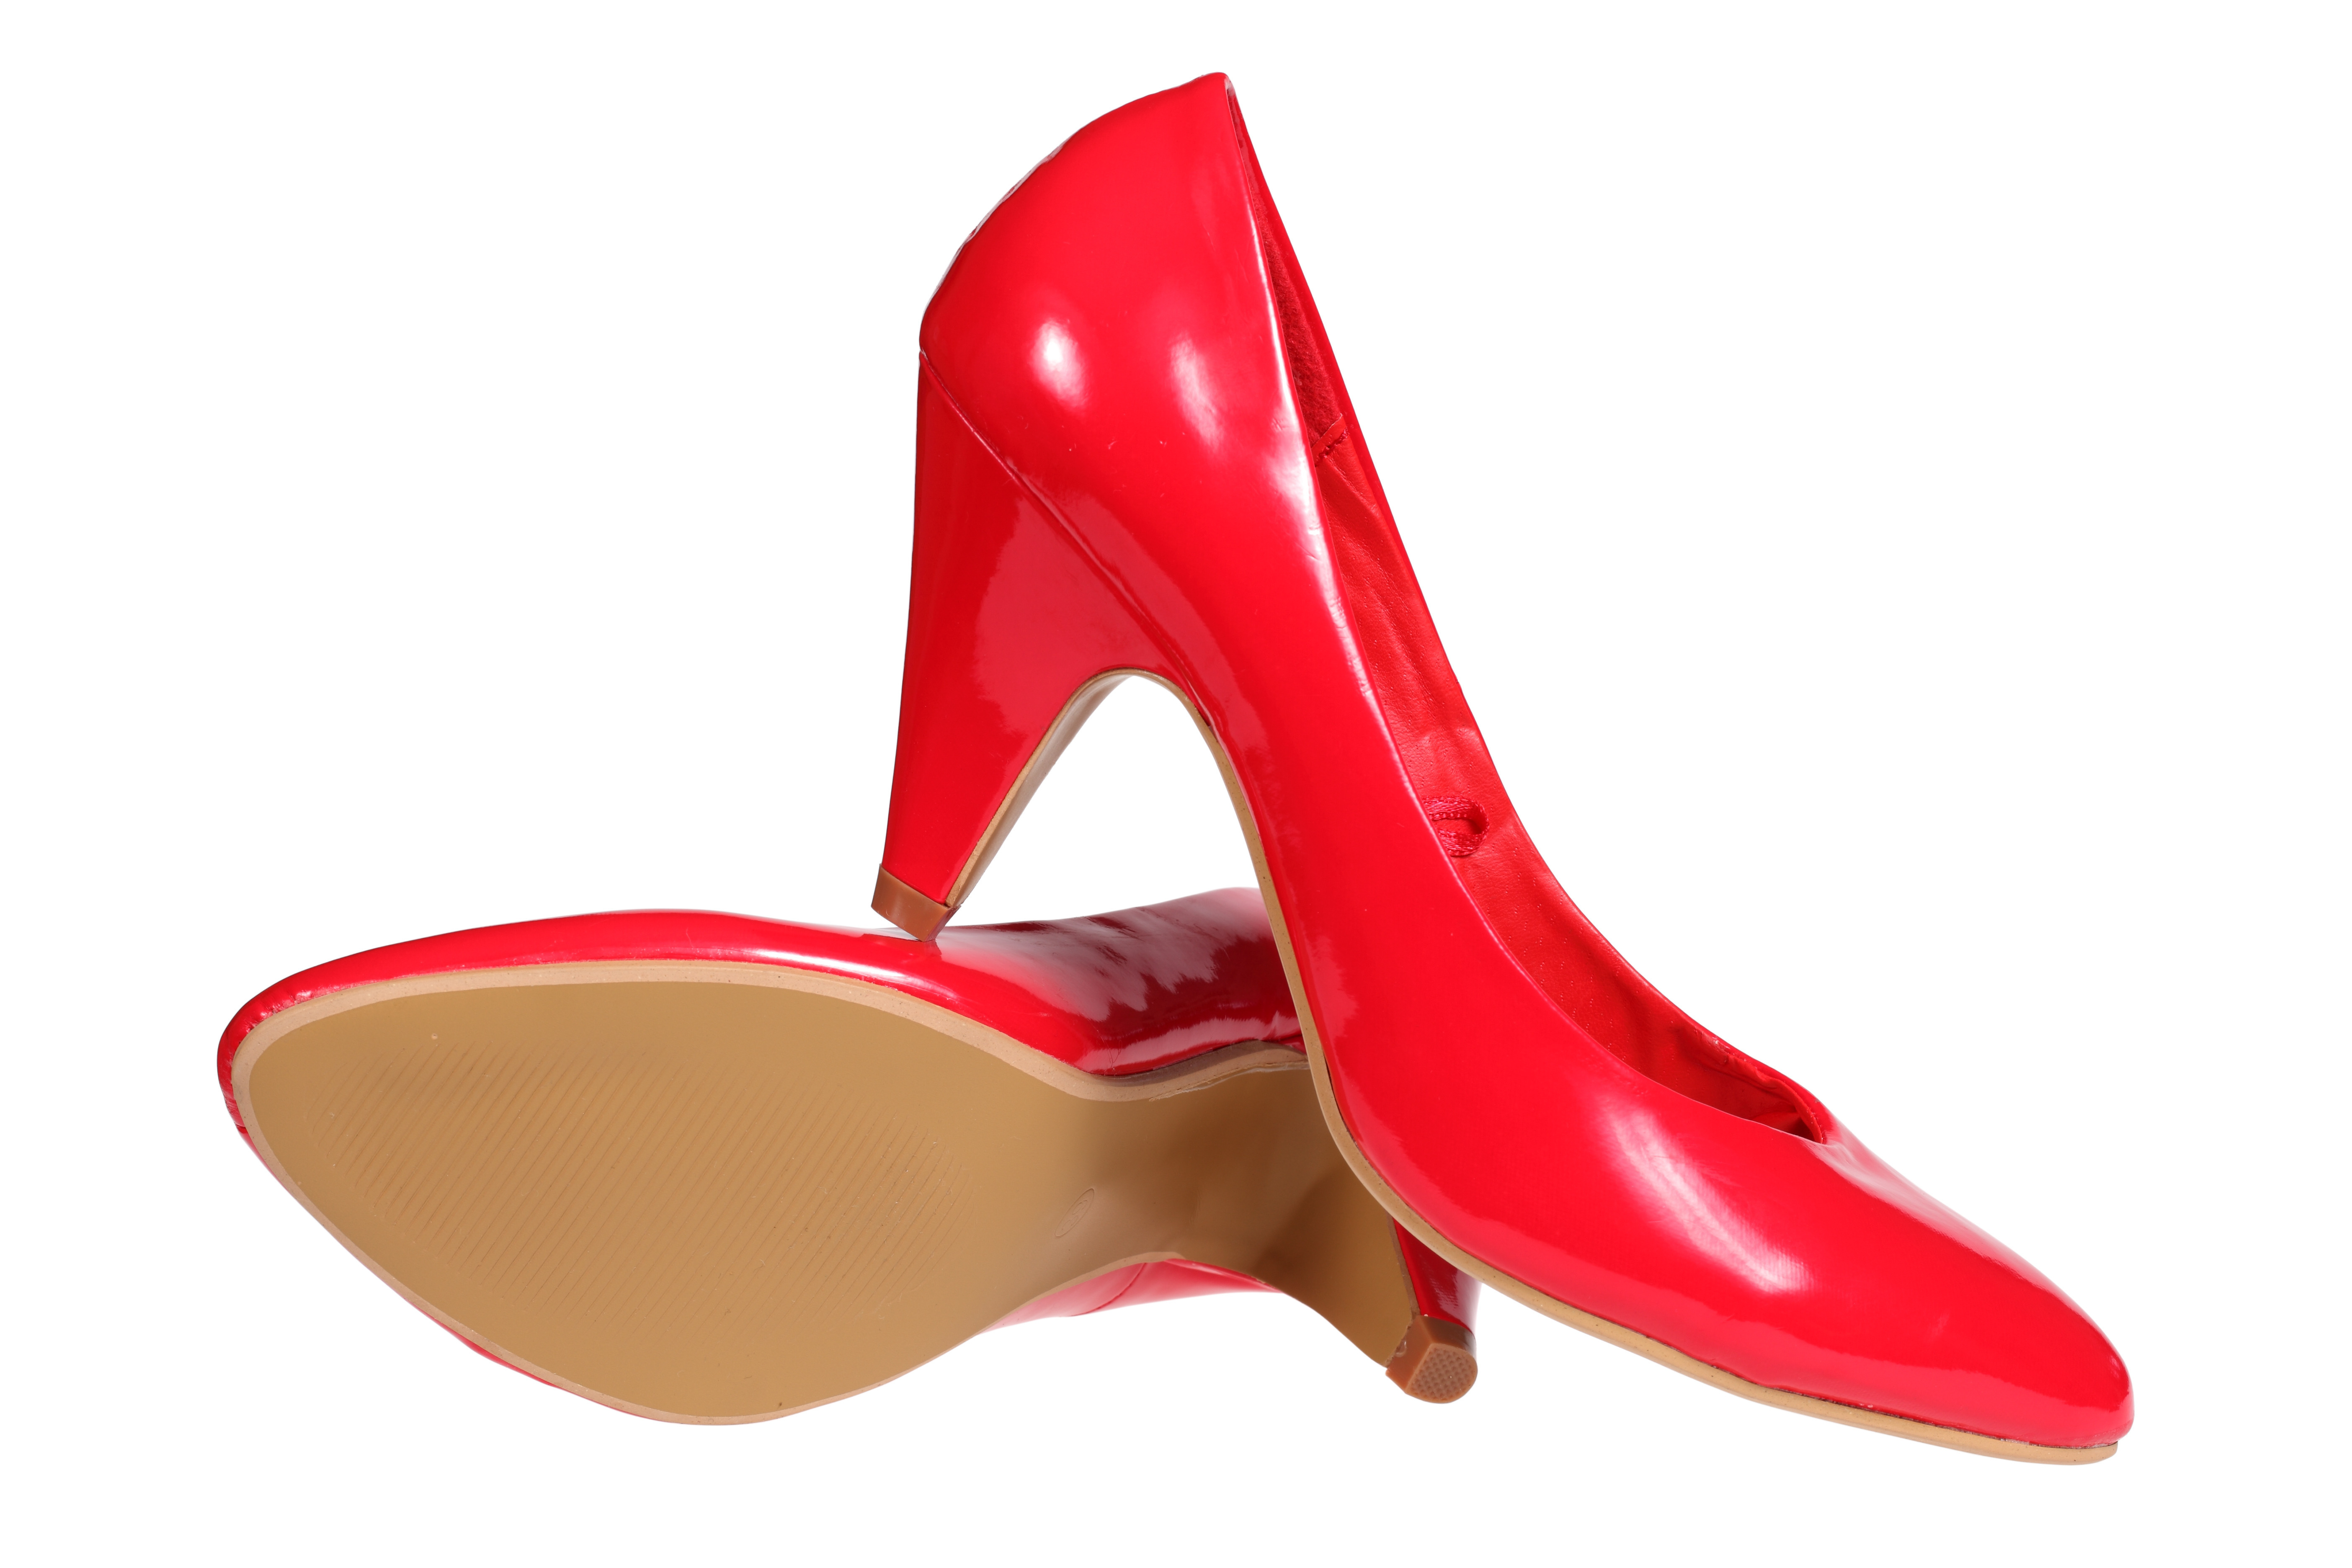 A pair of red women s heel shoes isolated over white with clipping path